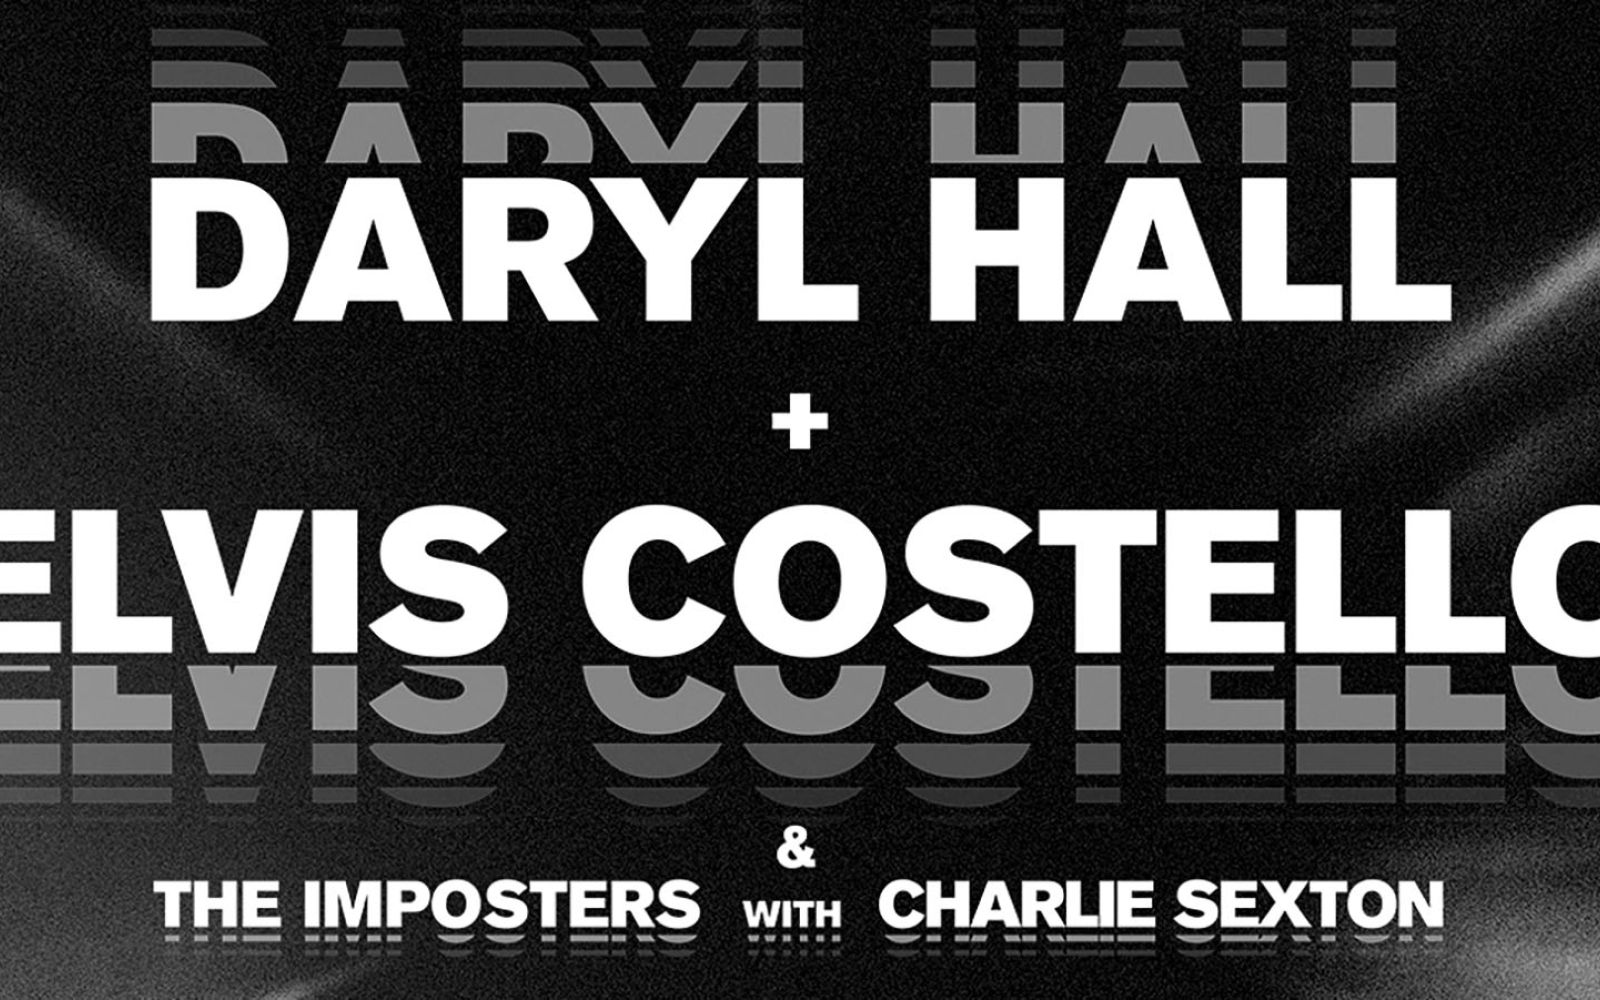 Daryl Hall and Elvis Costello will embark on a summer tour.